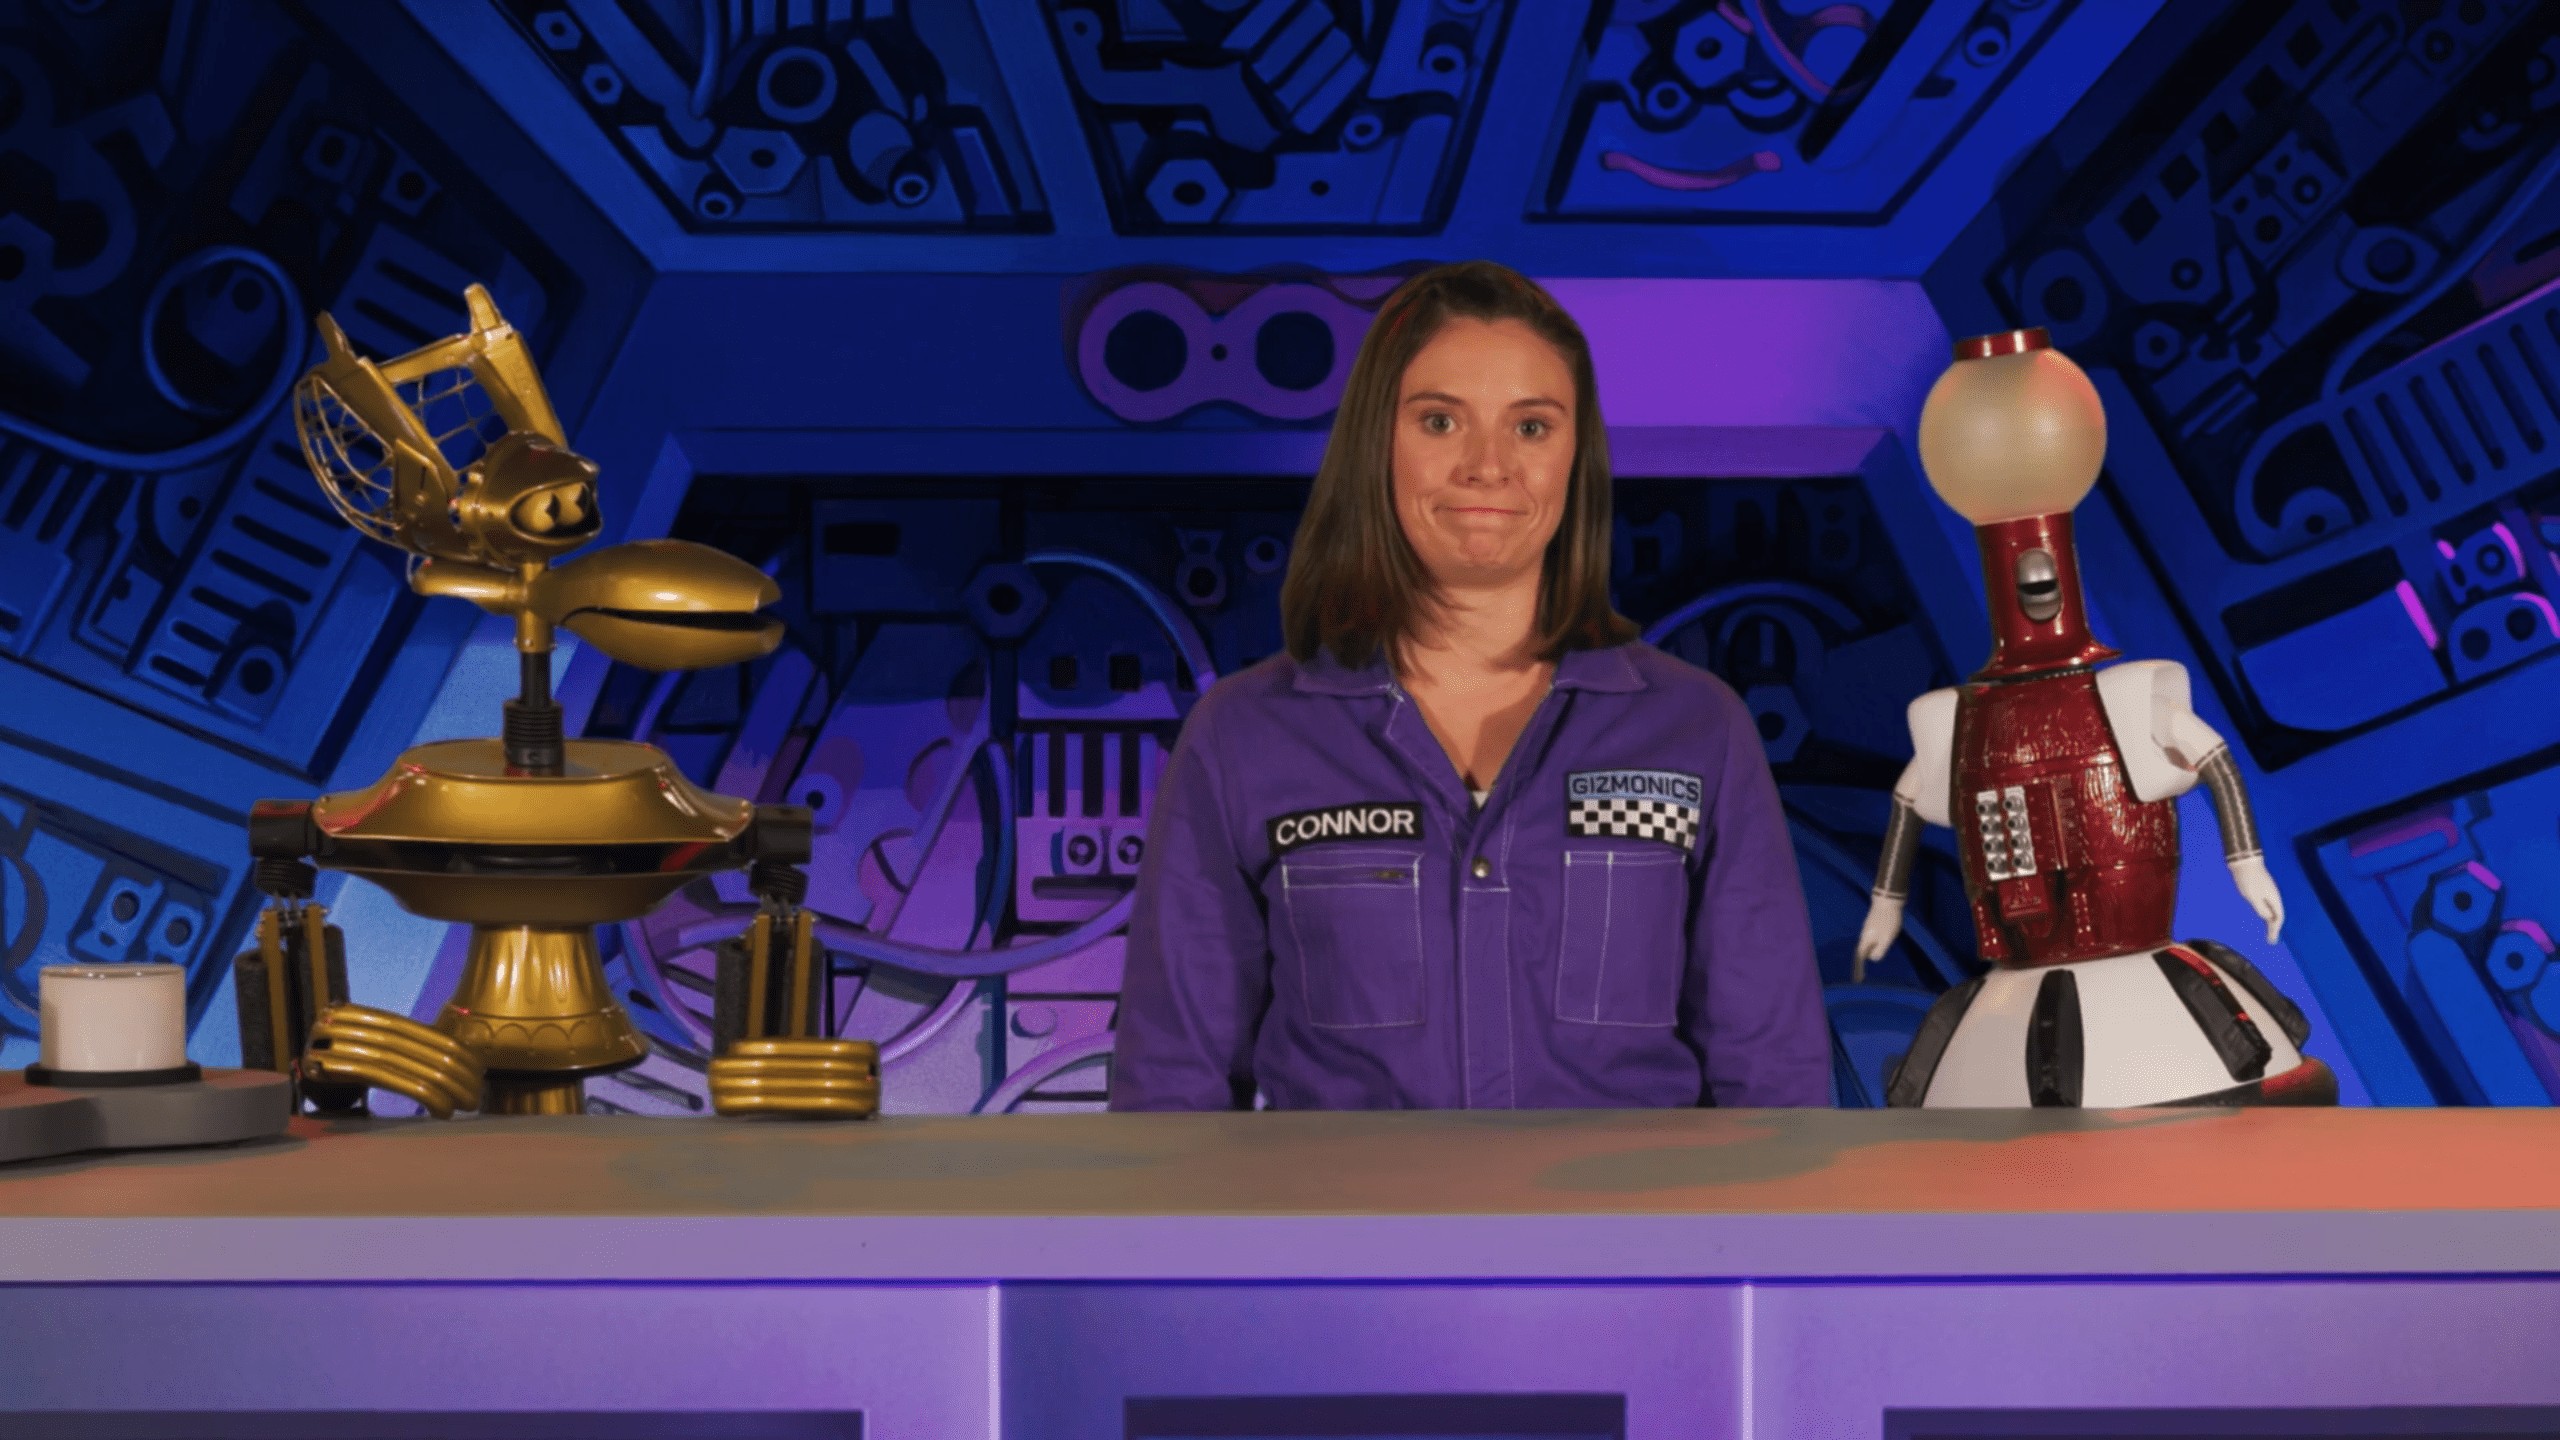 The MST3K season started on Friday! What does that mean for you? 3